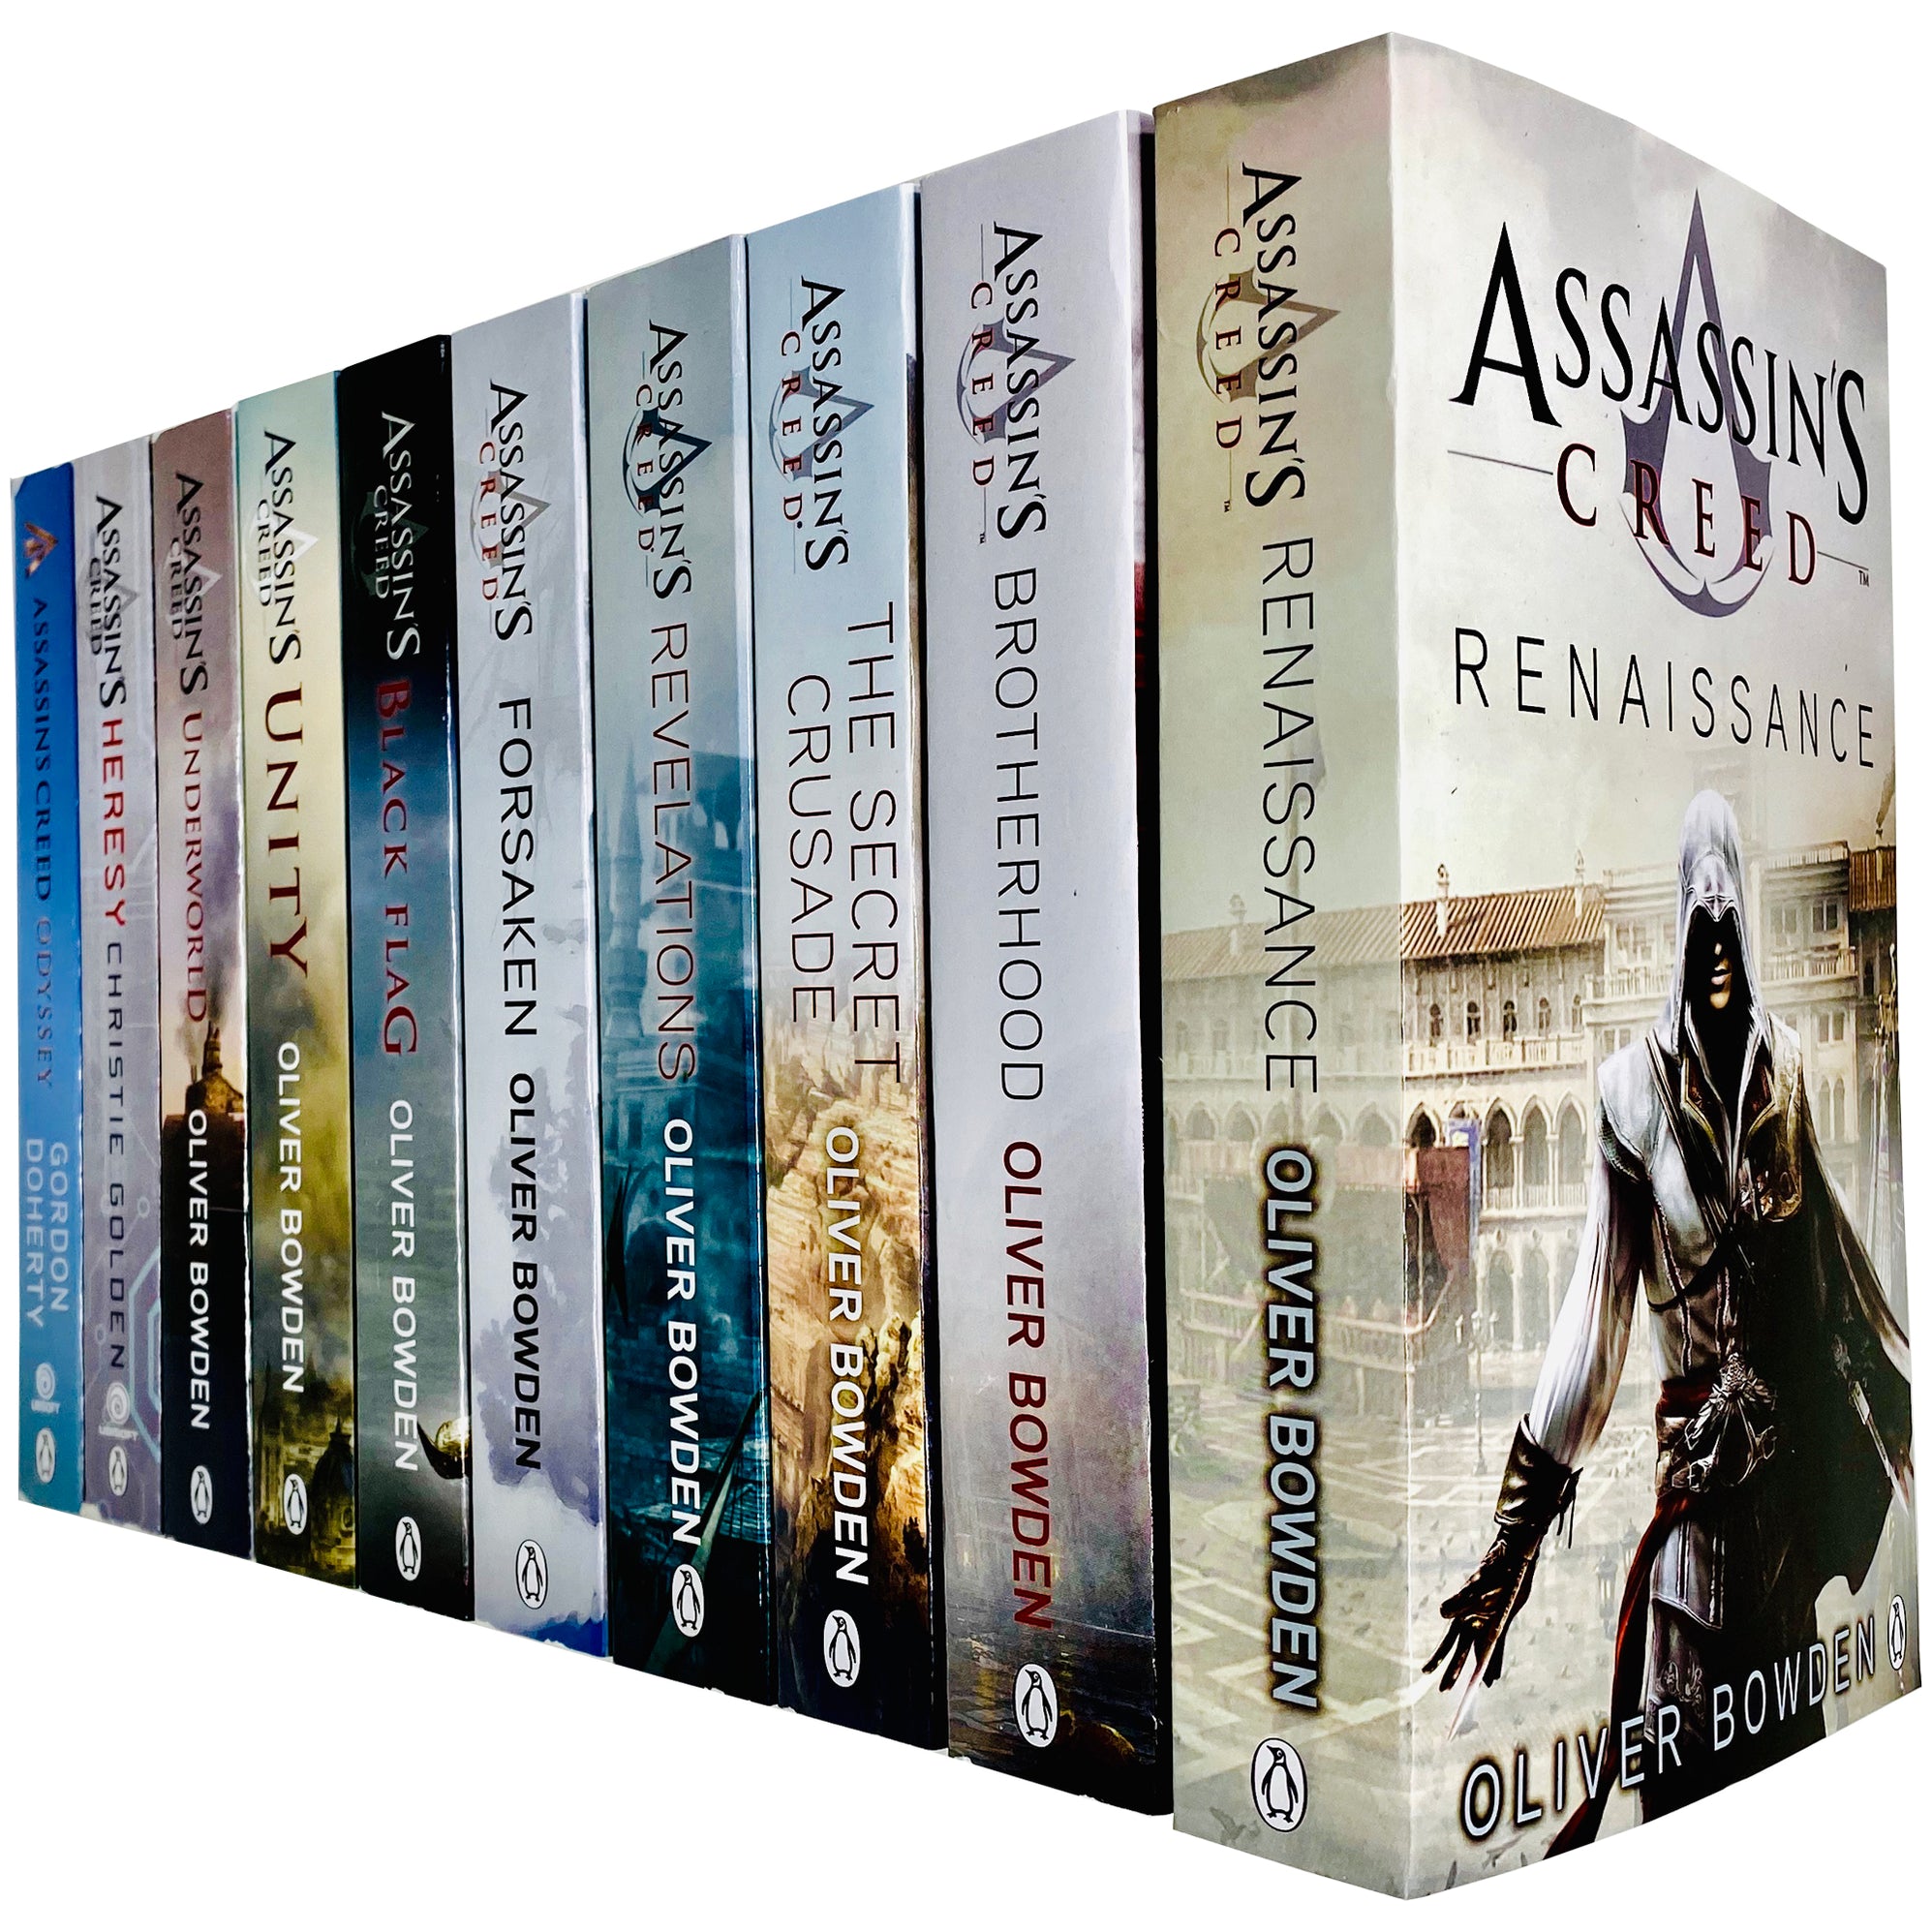 victor the assassin book series in order